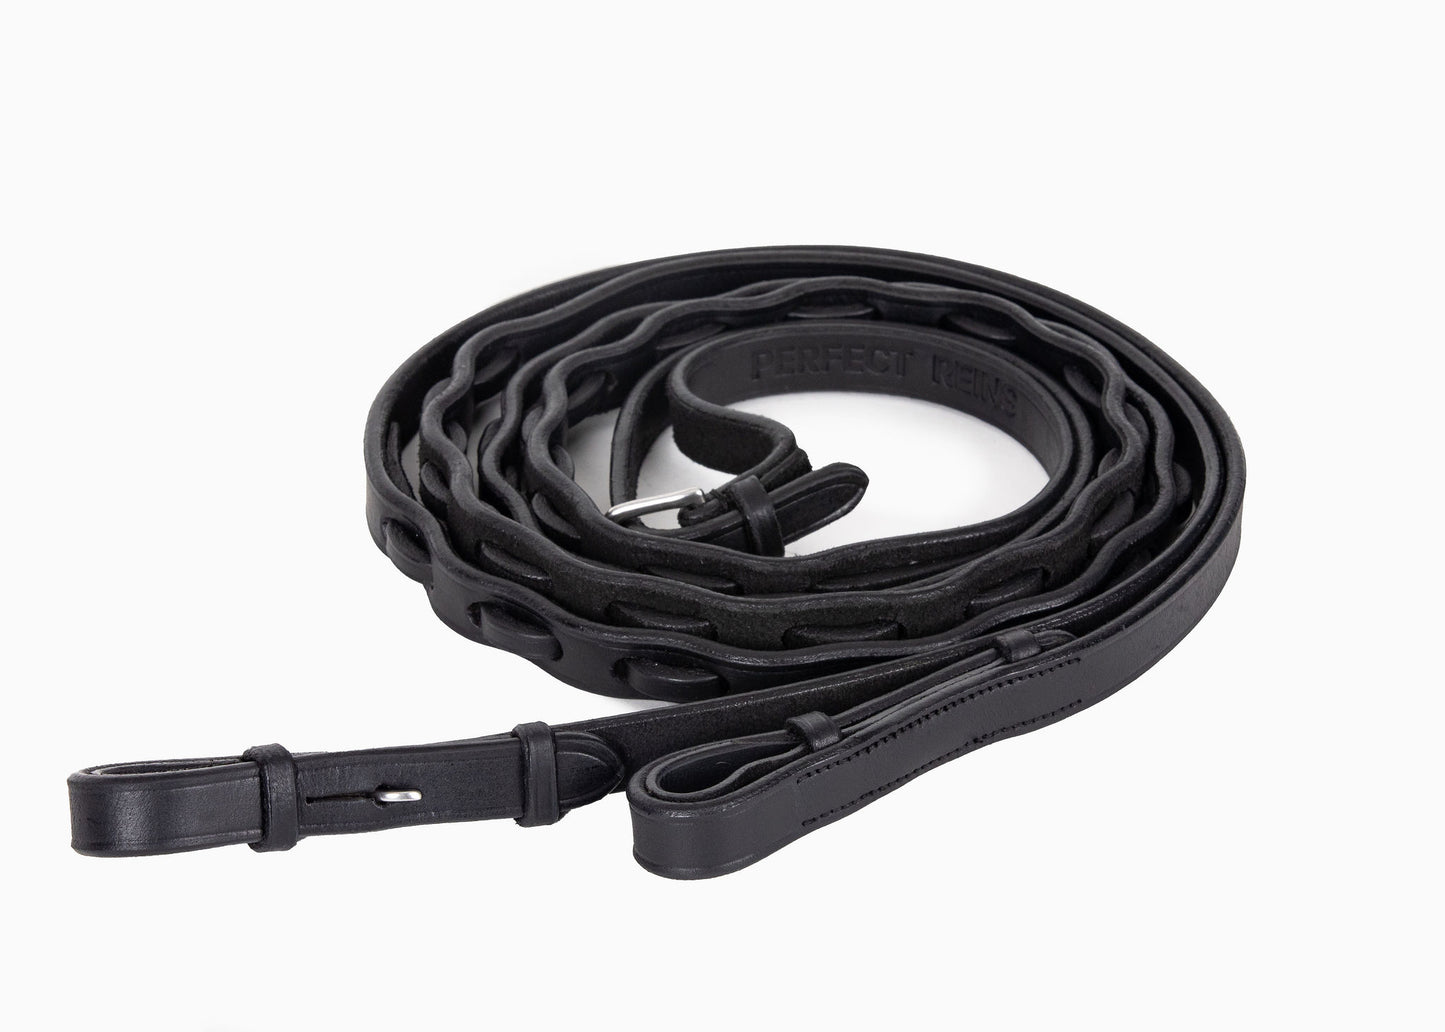 ProSeries Perfect Reins